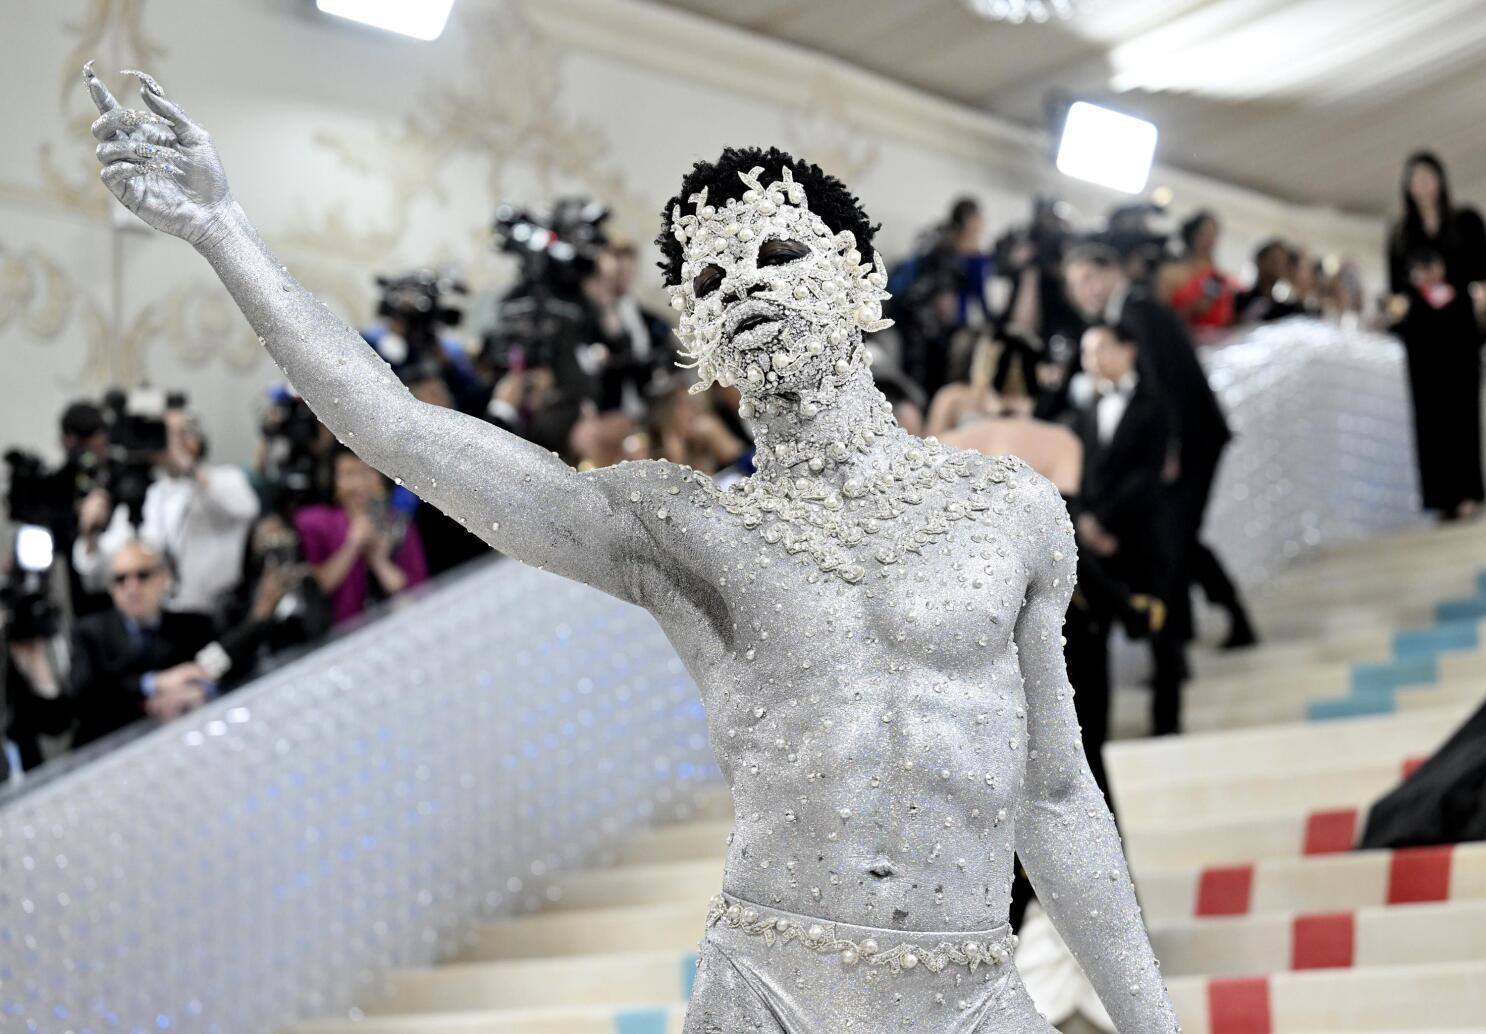 PHOTOS: See All The Stars Departing From The Mark Before The Met Gala 2023